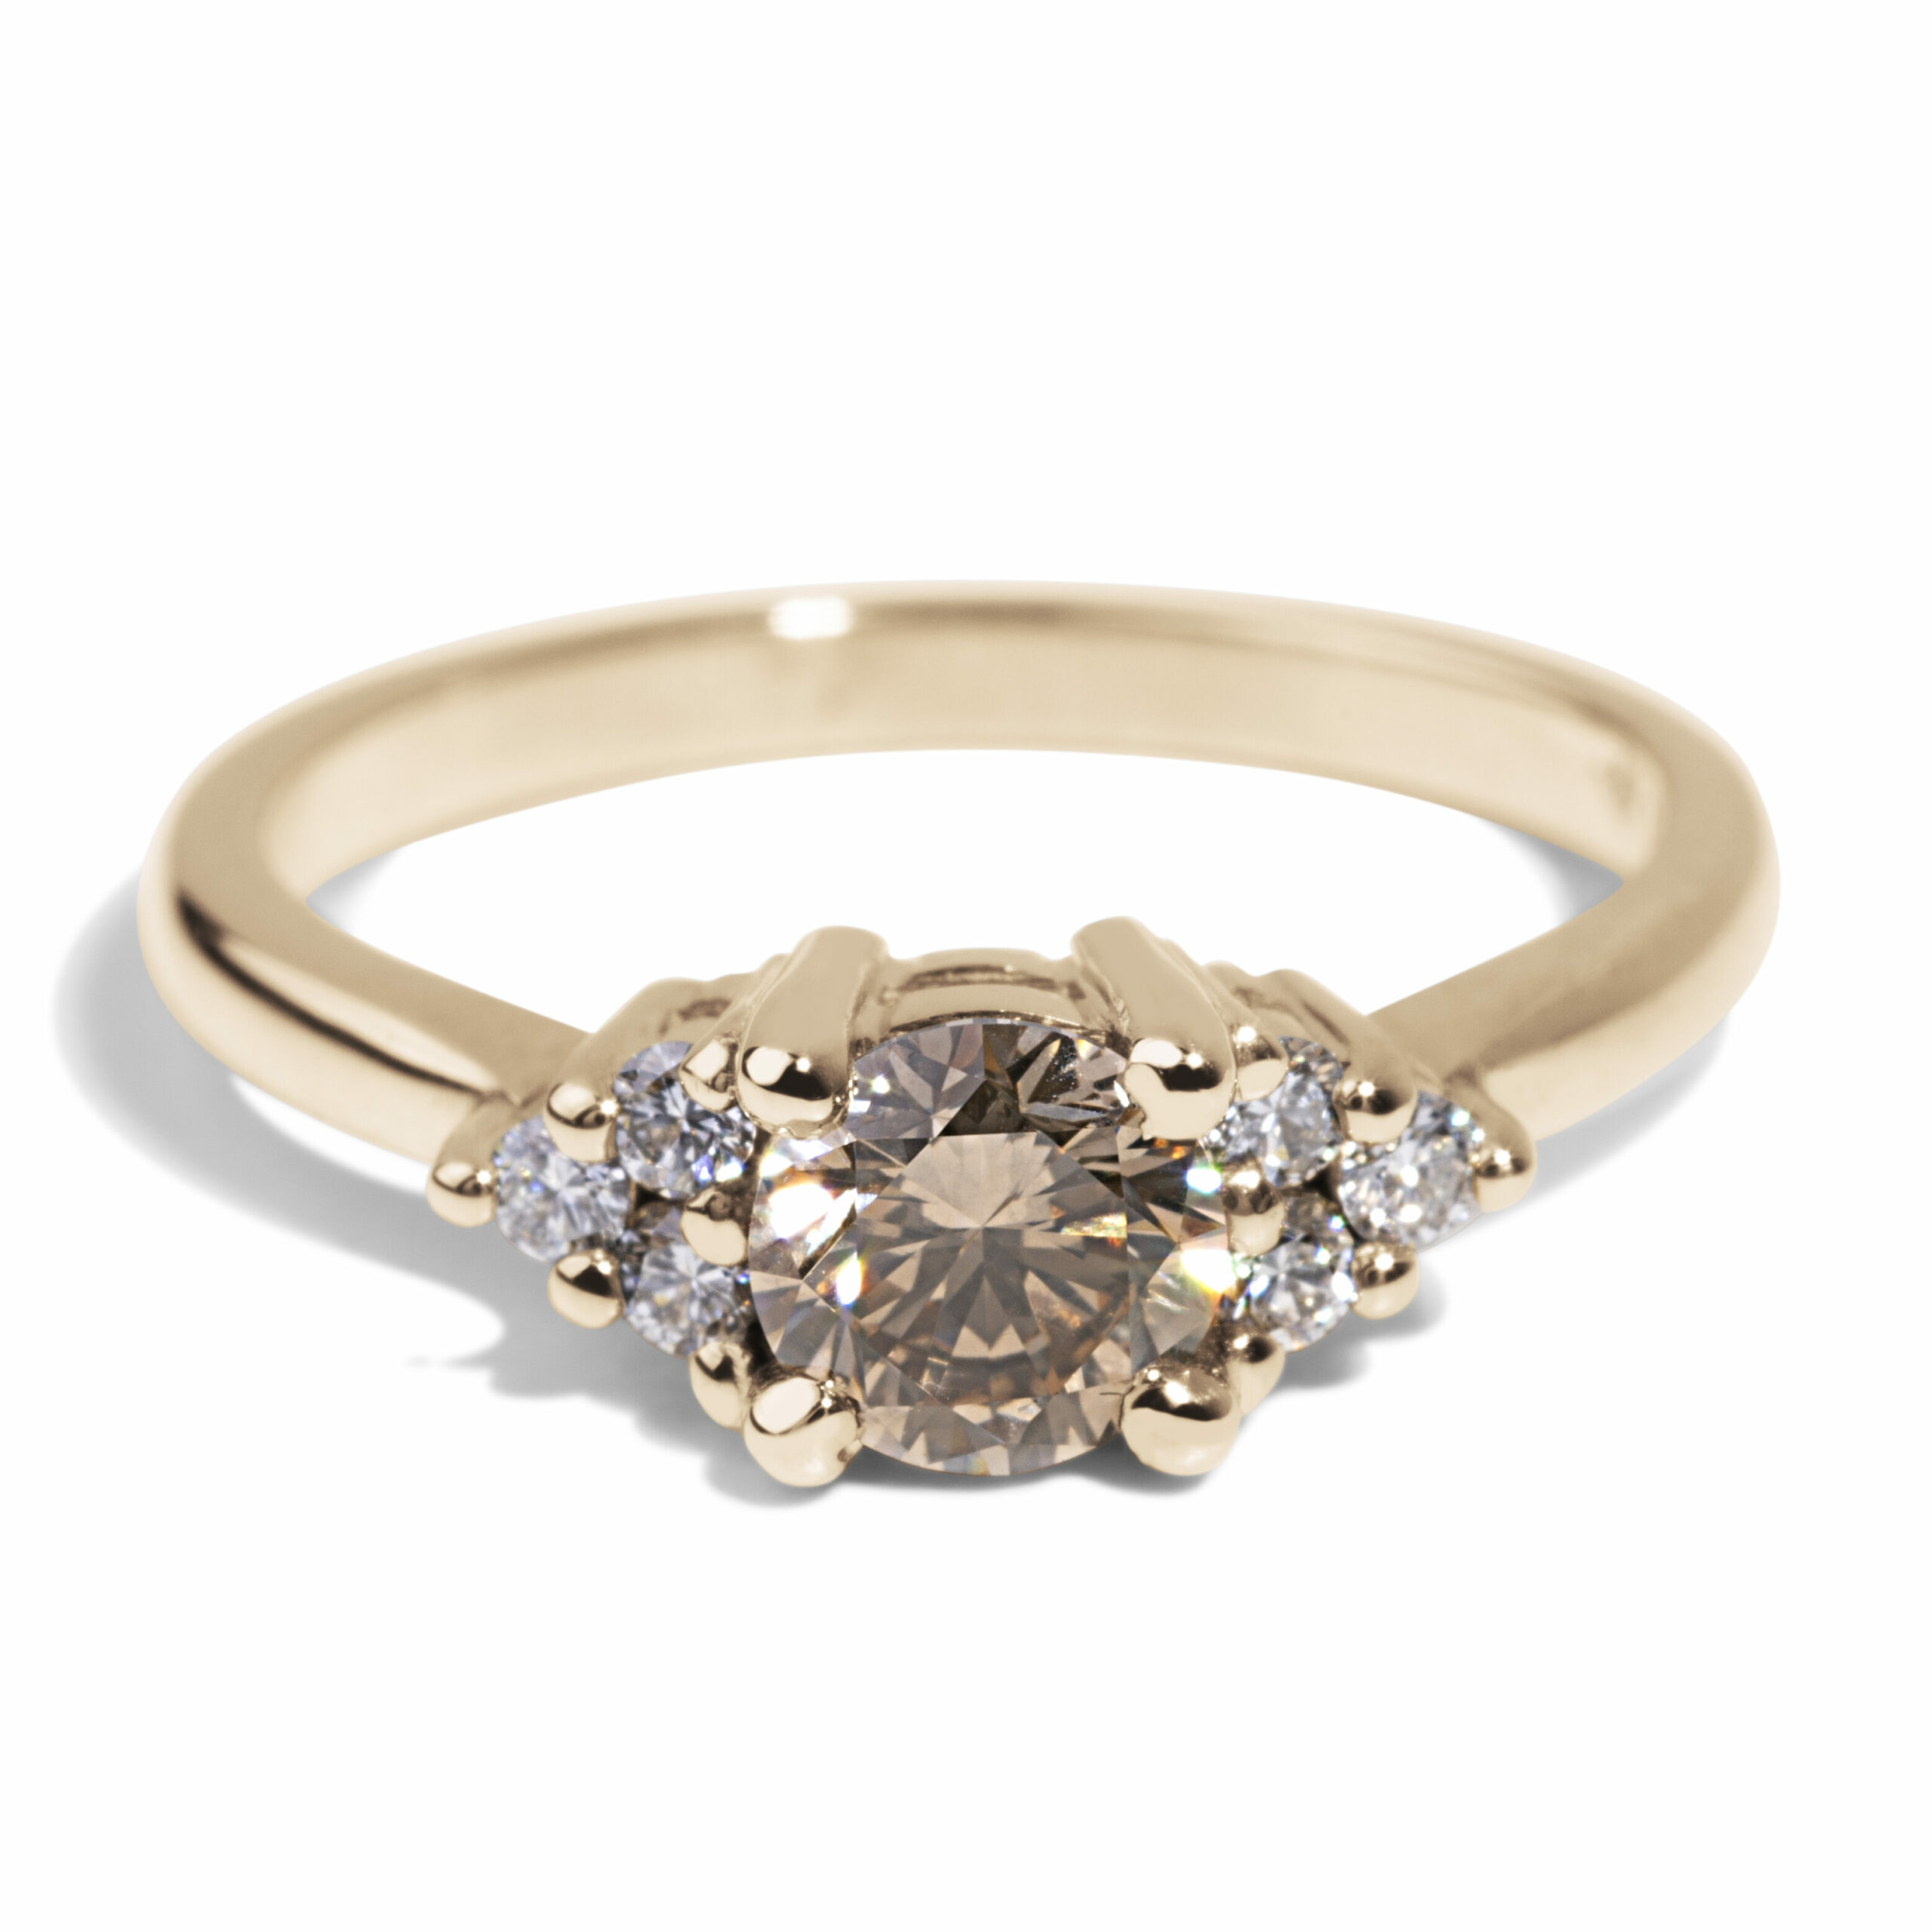 This stunning ring features a champagne diamond center stone with diamond side stones.